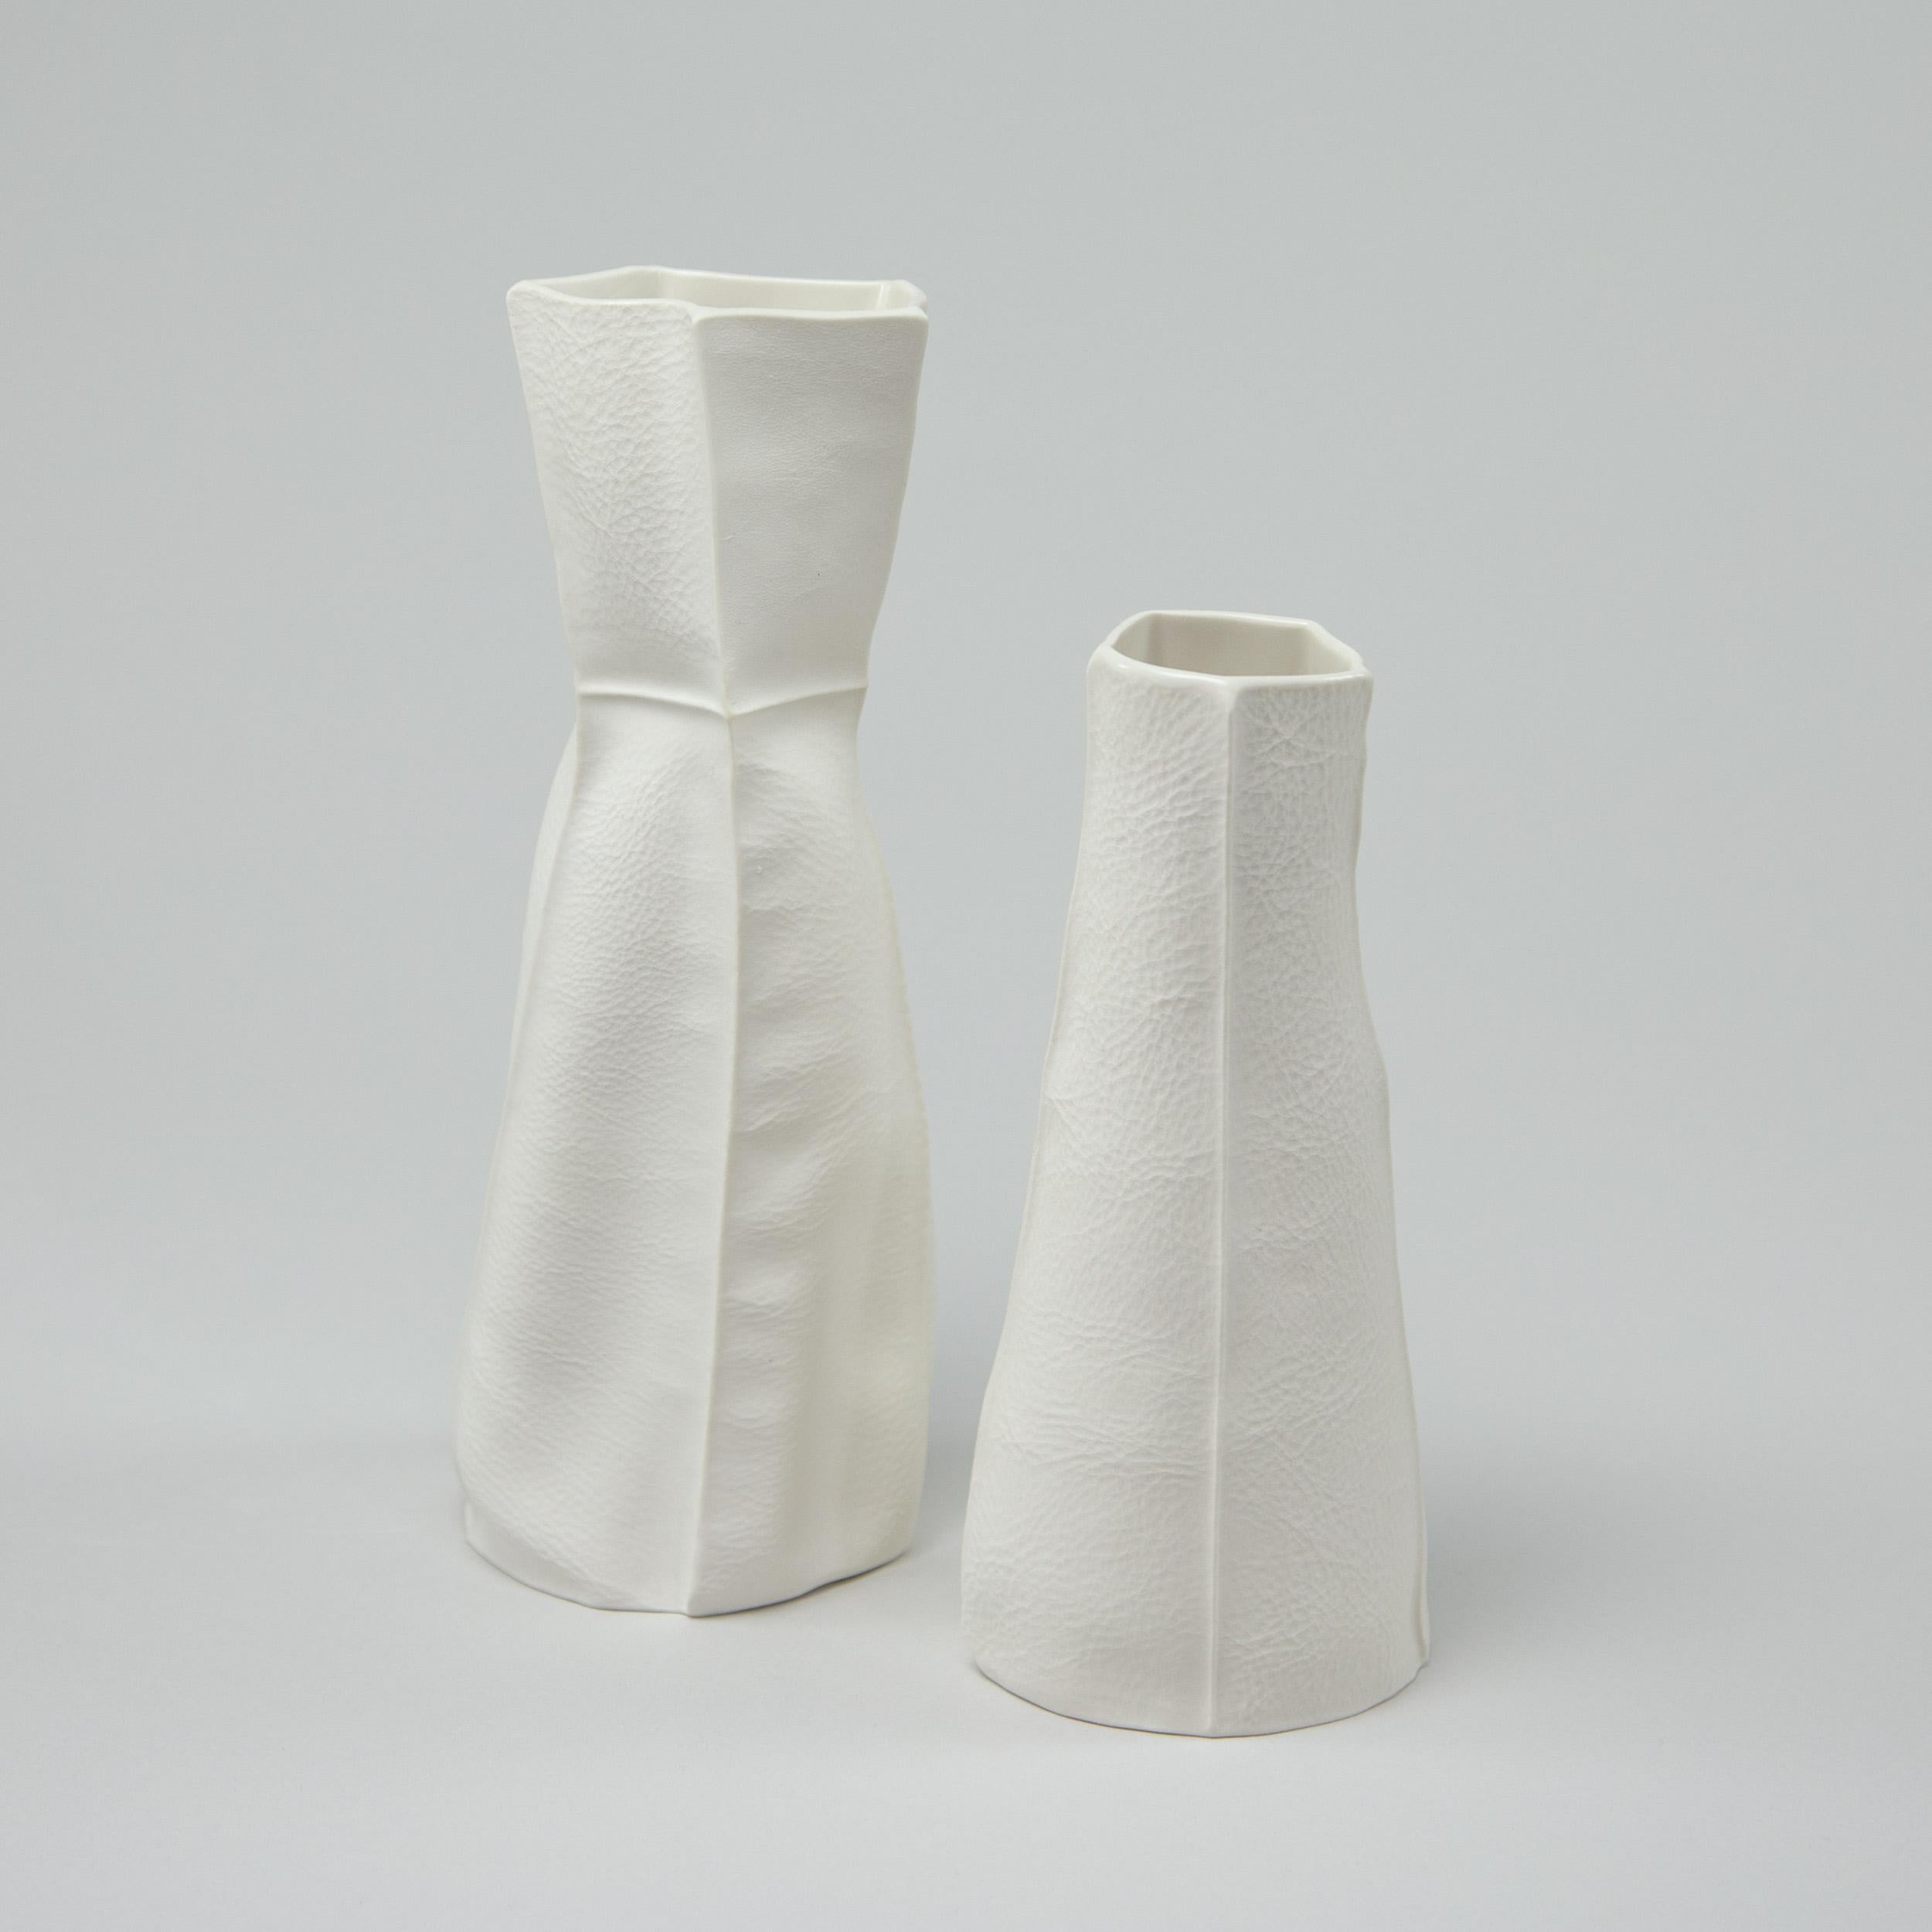 A pair of tactile and organic porcelain vases with leather textured exterior surface and clear glazed interior. As a result of the production process each item is one-of-a-kind. Set includes one medium vase and one small vase. 

Use individually as